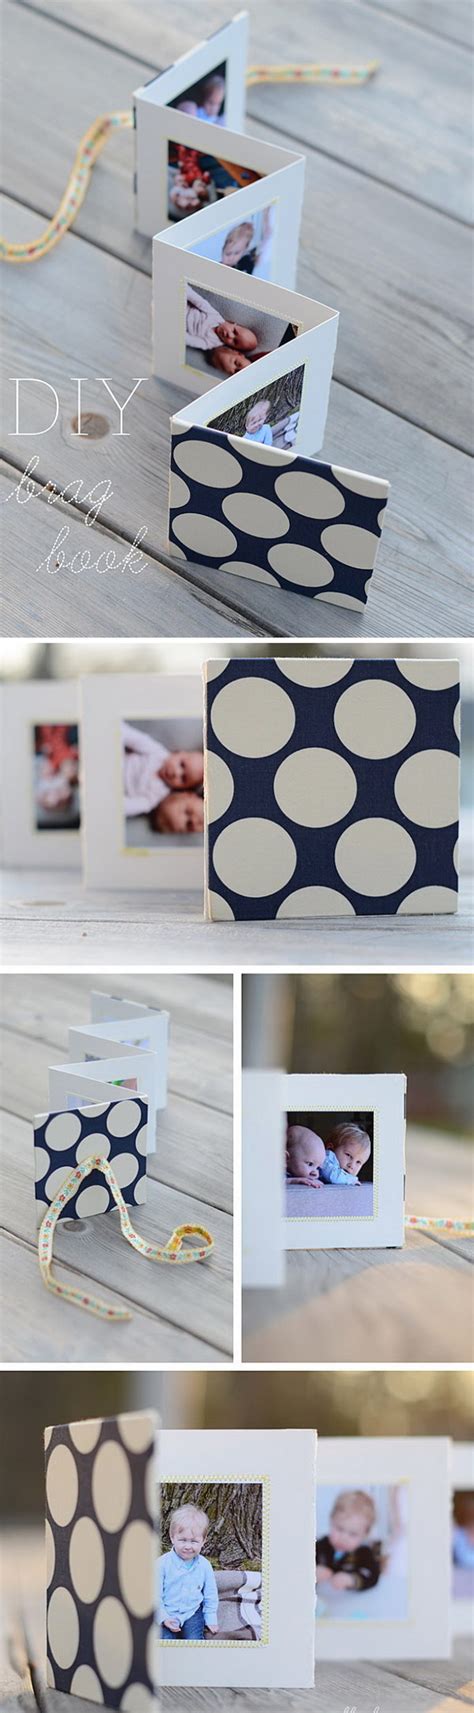 Best birthday gift ideas for moms in 2021. 20+ Heartfelt DIY Gifts for Mom - Noted List